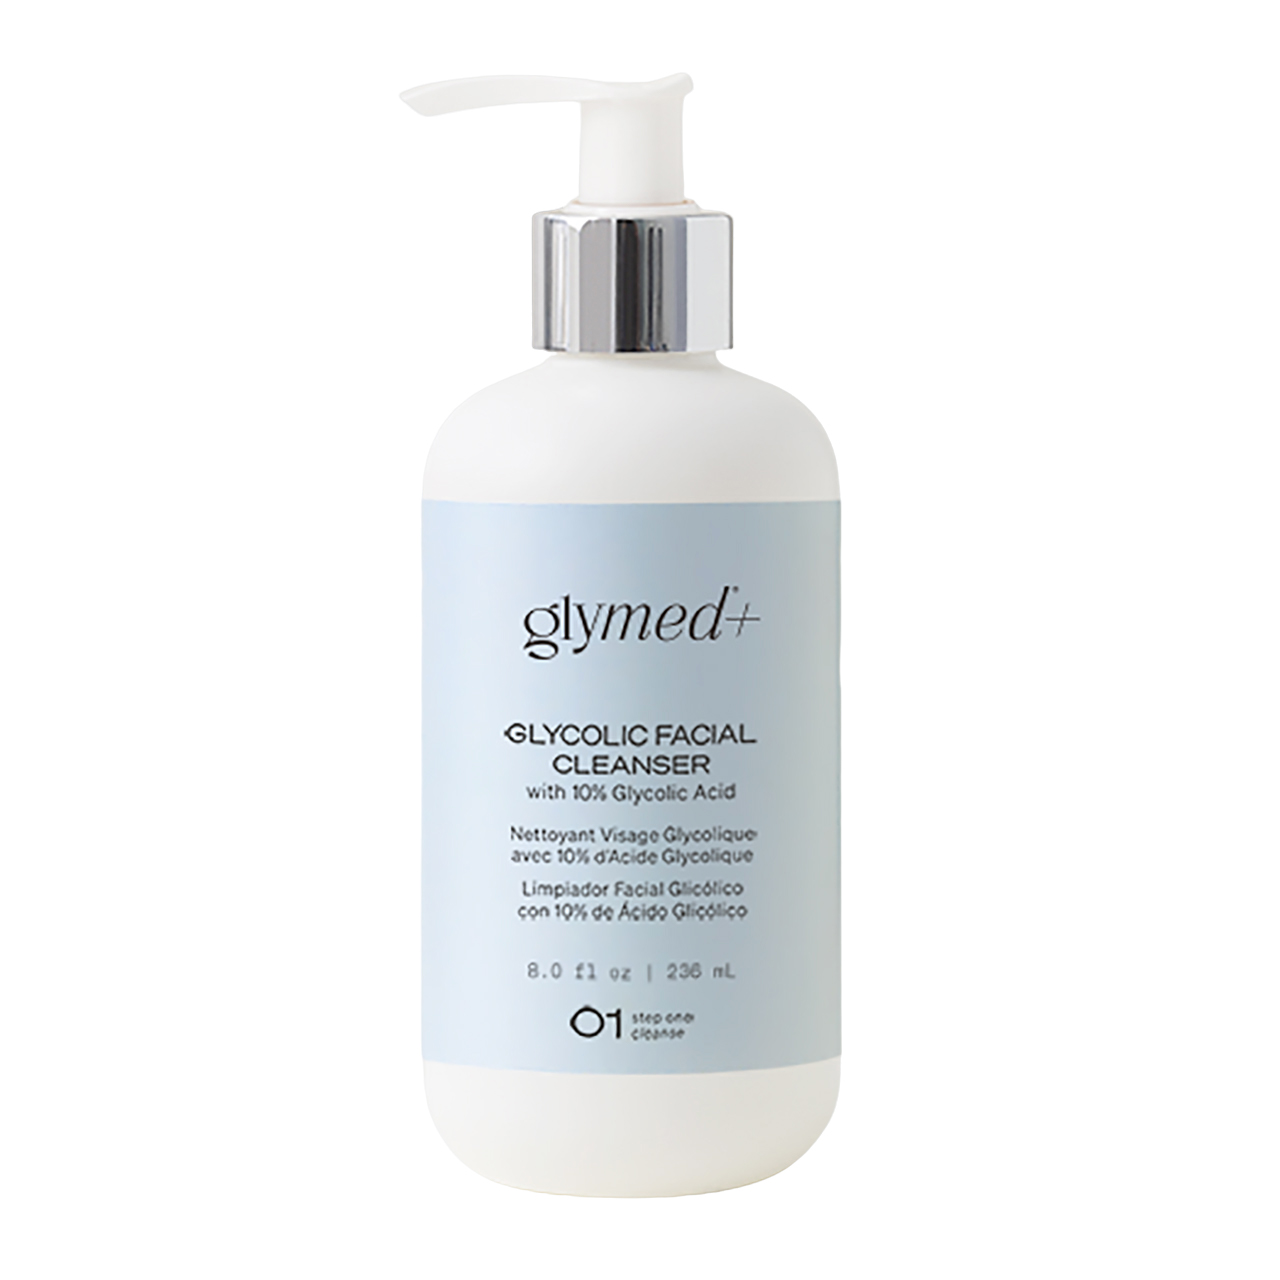 I am wanting to purchase Glymed Gentle Facial Cleanser but don’t see it on your site.